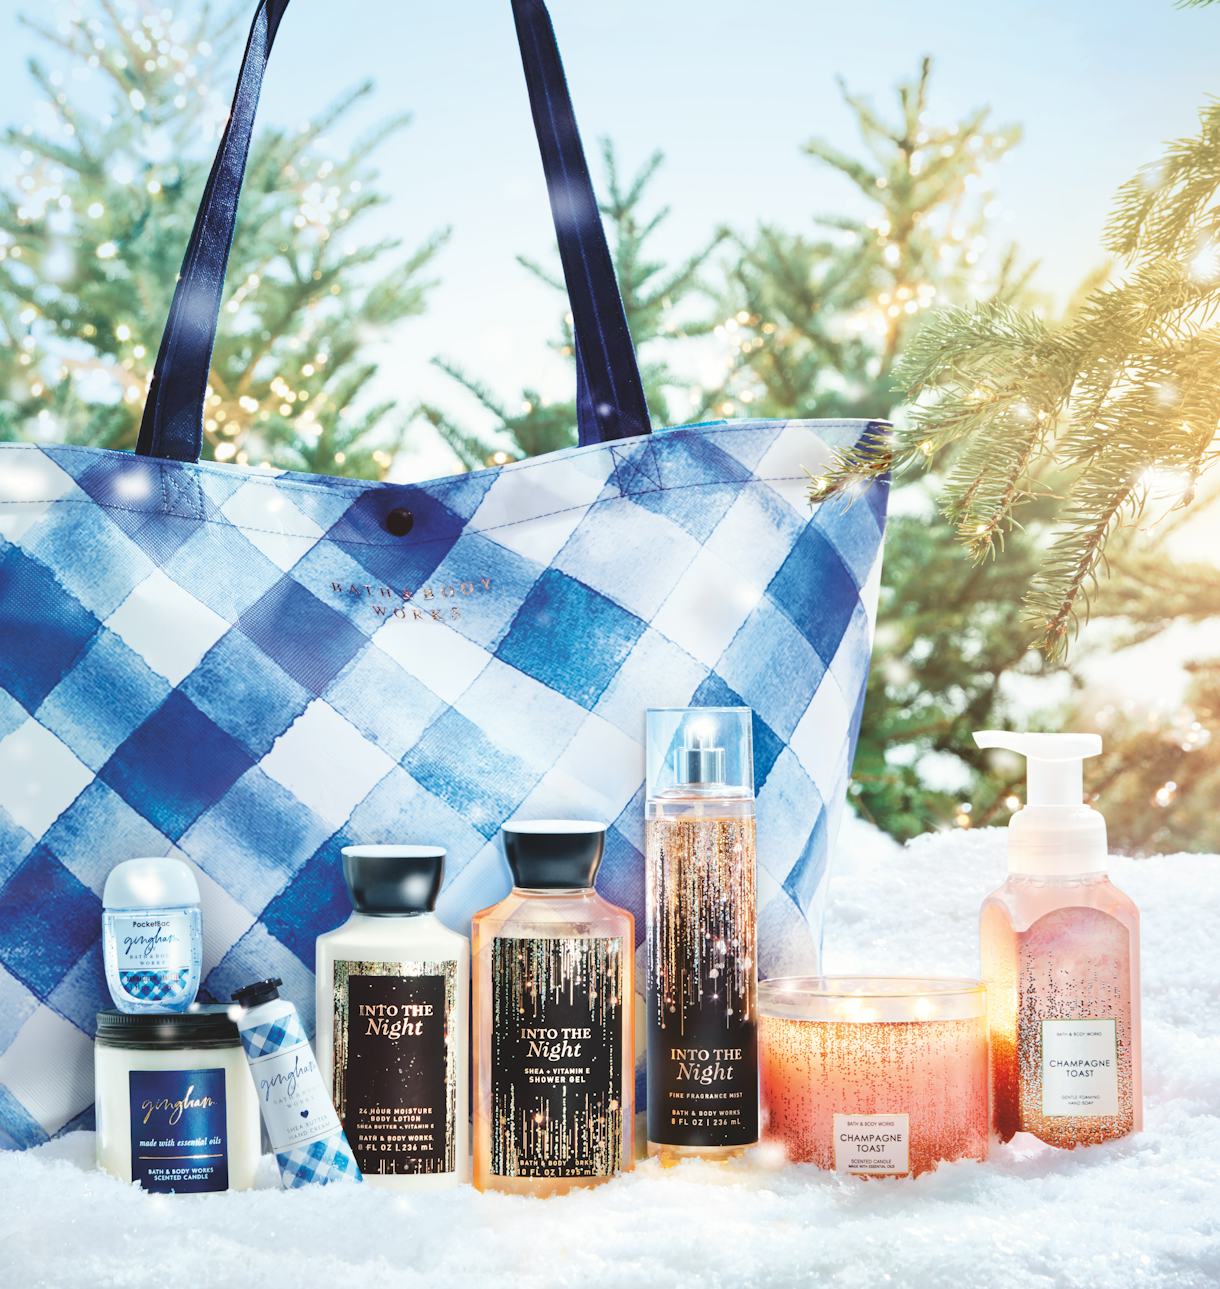 Bath & Body Works' Black Friday 2019 Sale Has Their Best Gift With